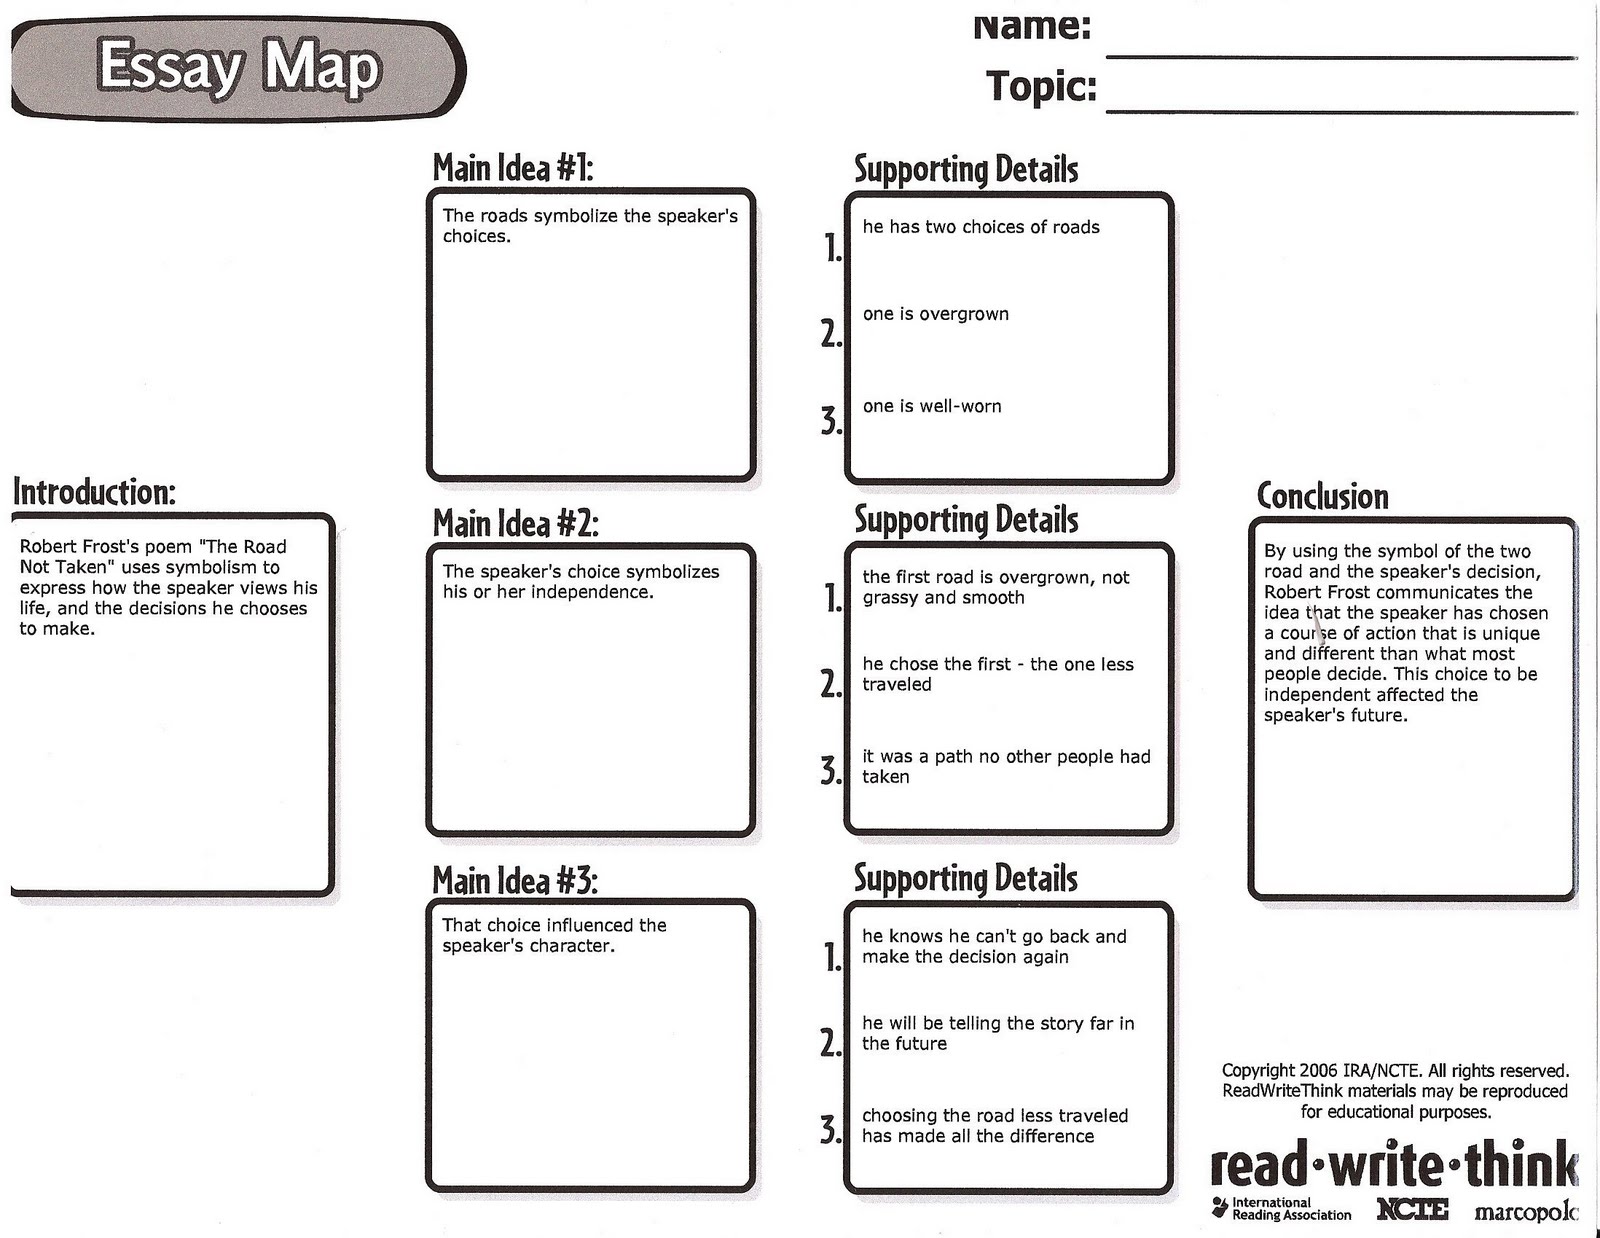 Examples of an essay map